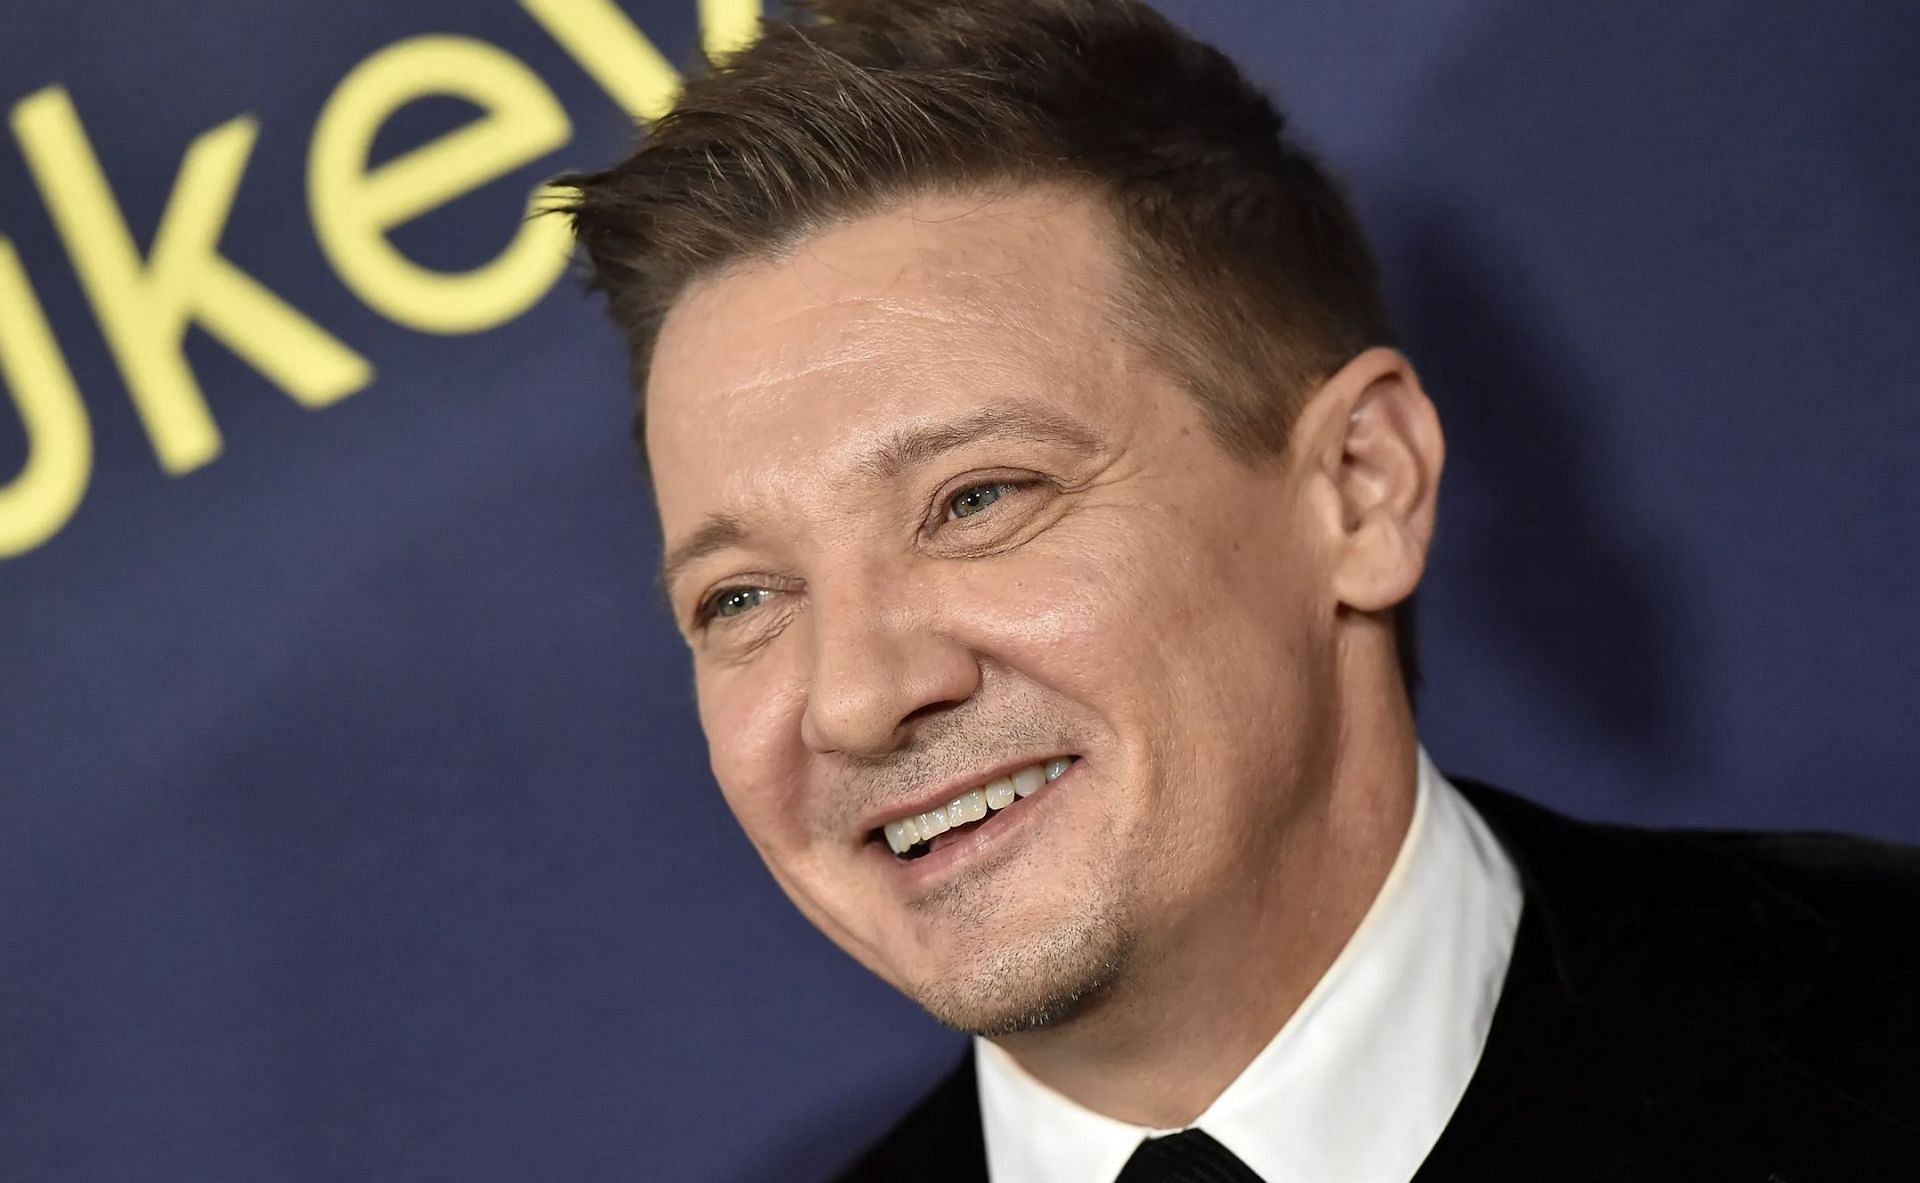 Rebuilding and anticipating: Jeremy Renner&#039;s inspiring journey and excitement ahead (Image via Getty)